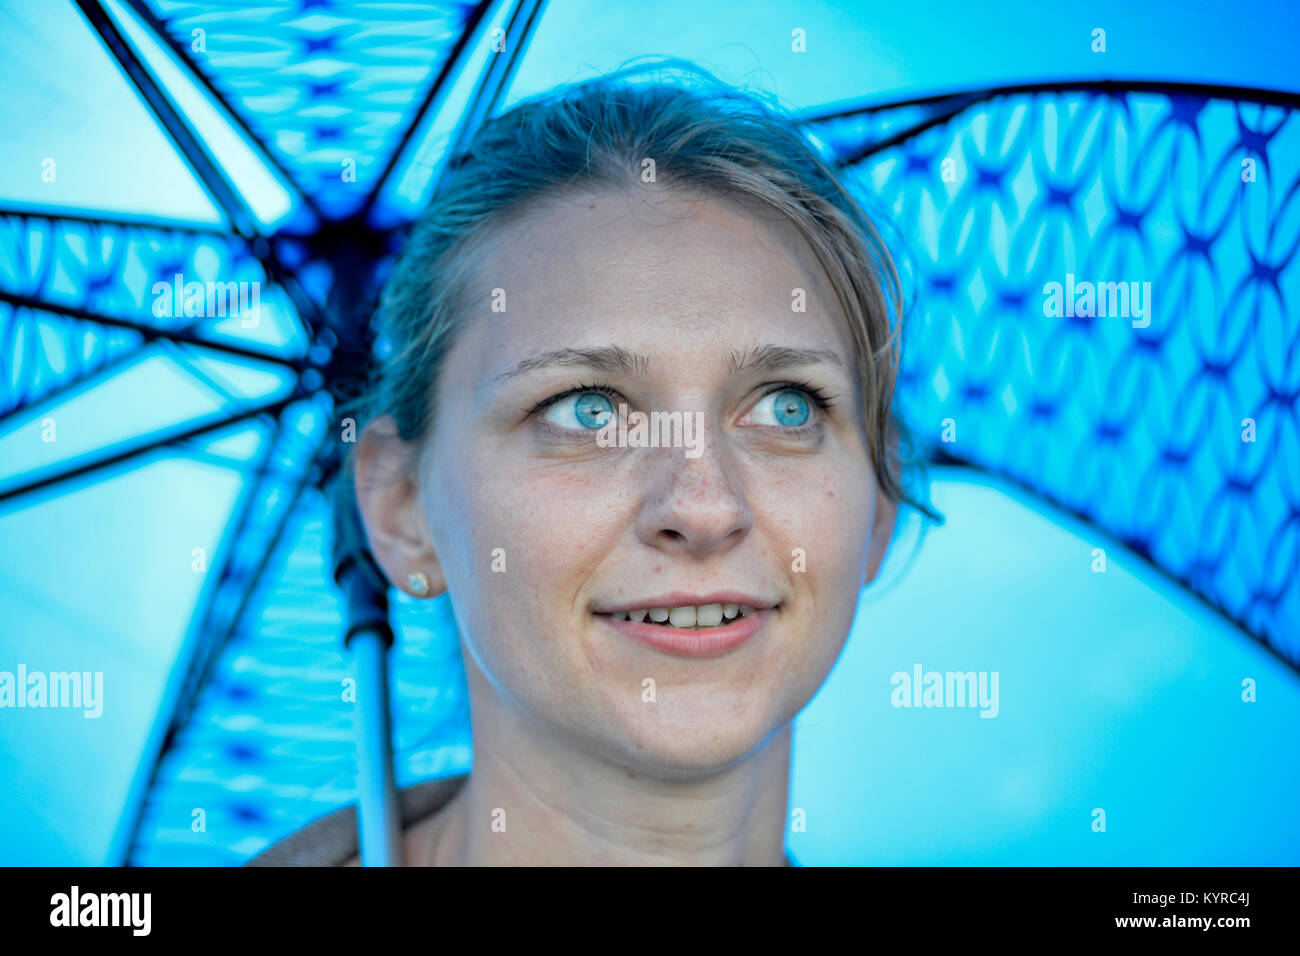 A blonde girl with blue eyes smiling under a blue umbrella Stock Photo